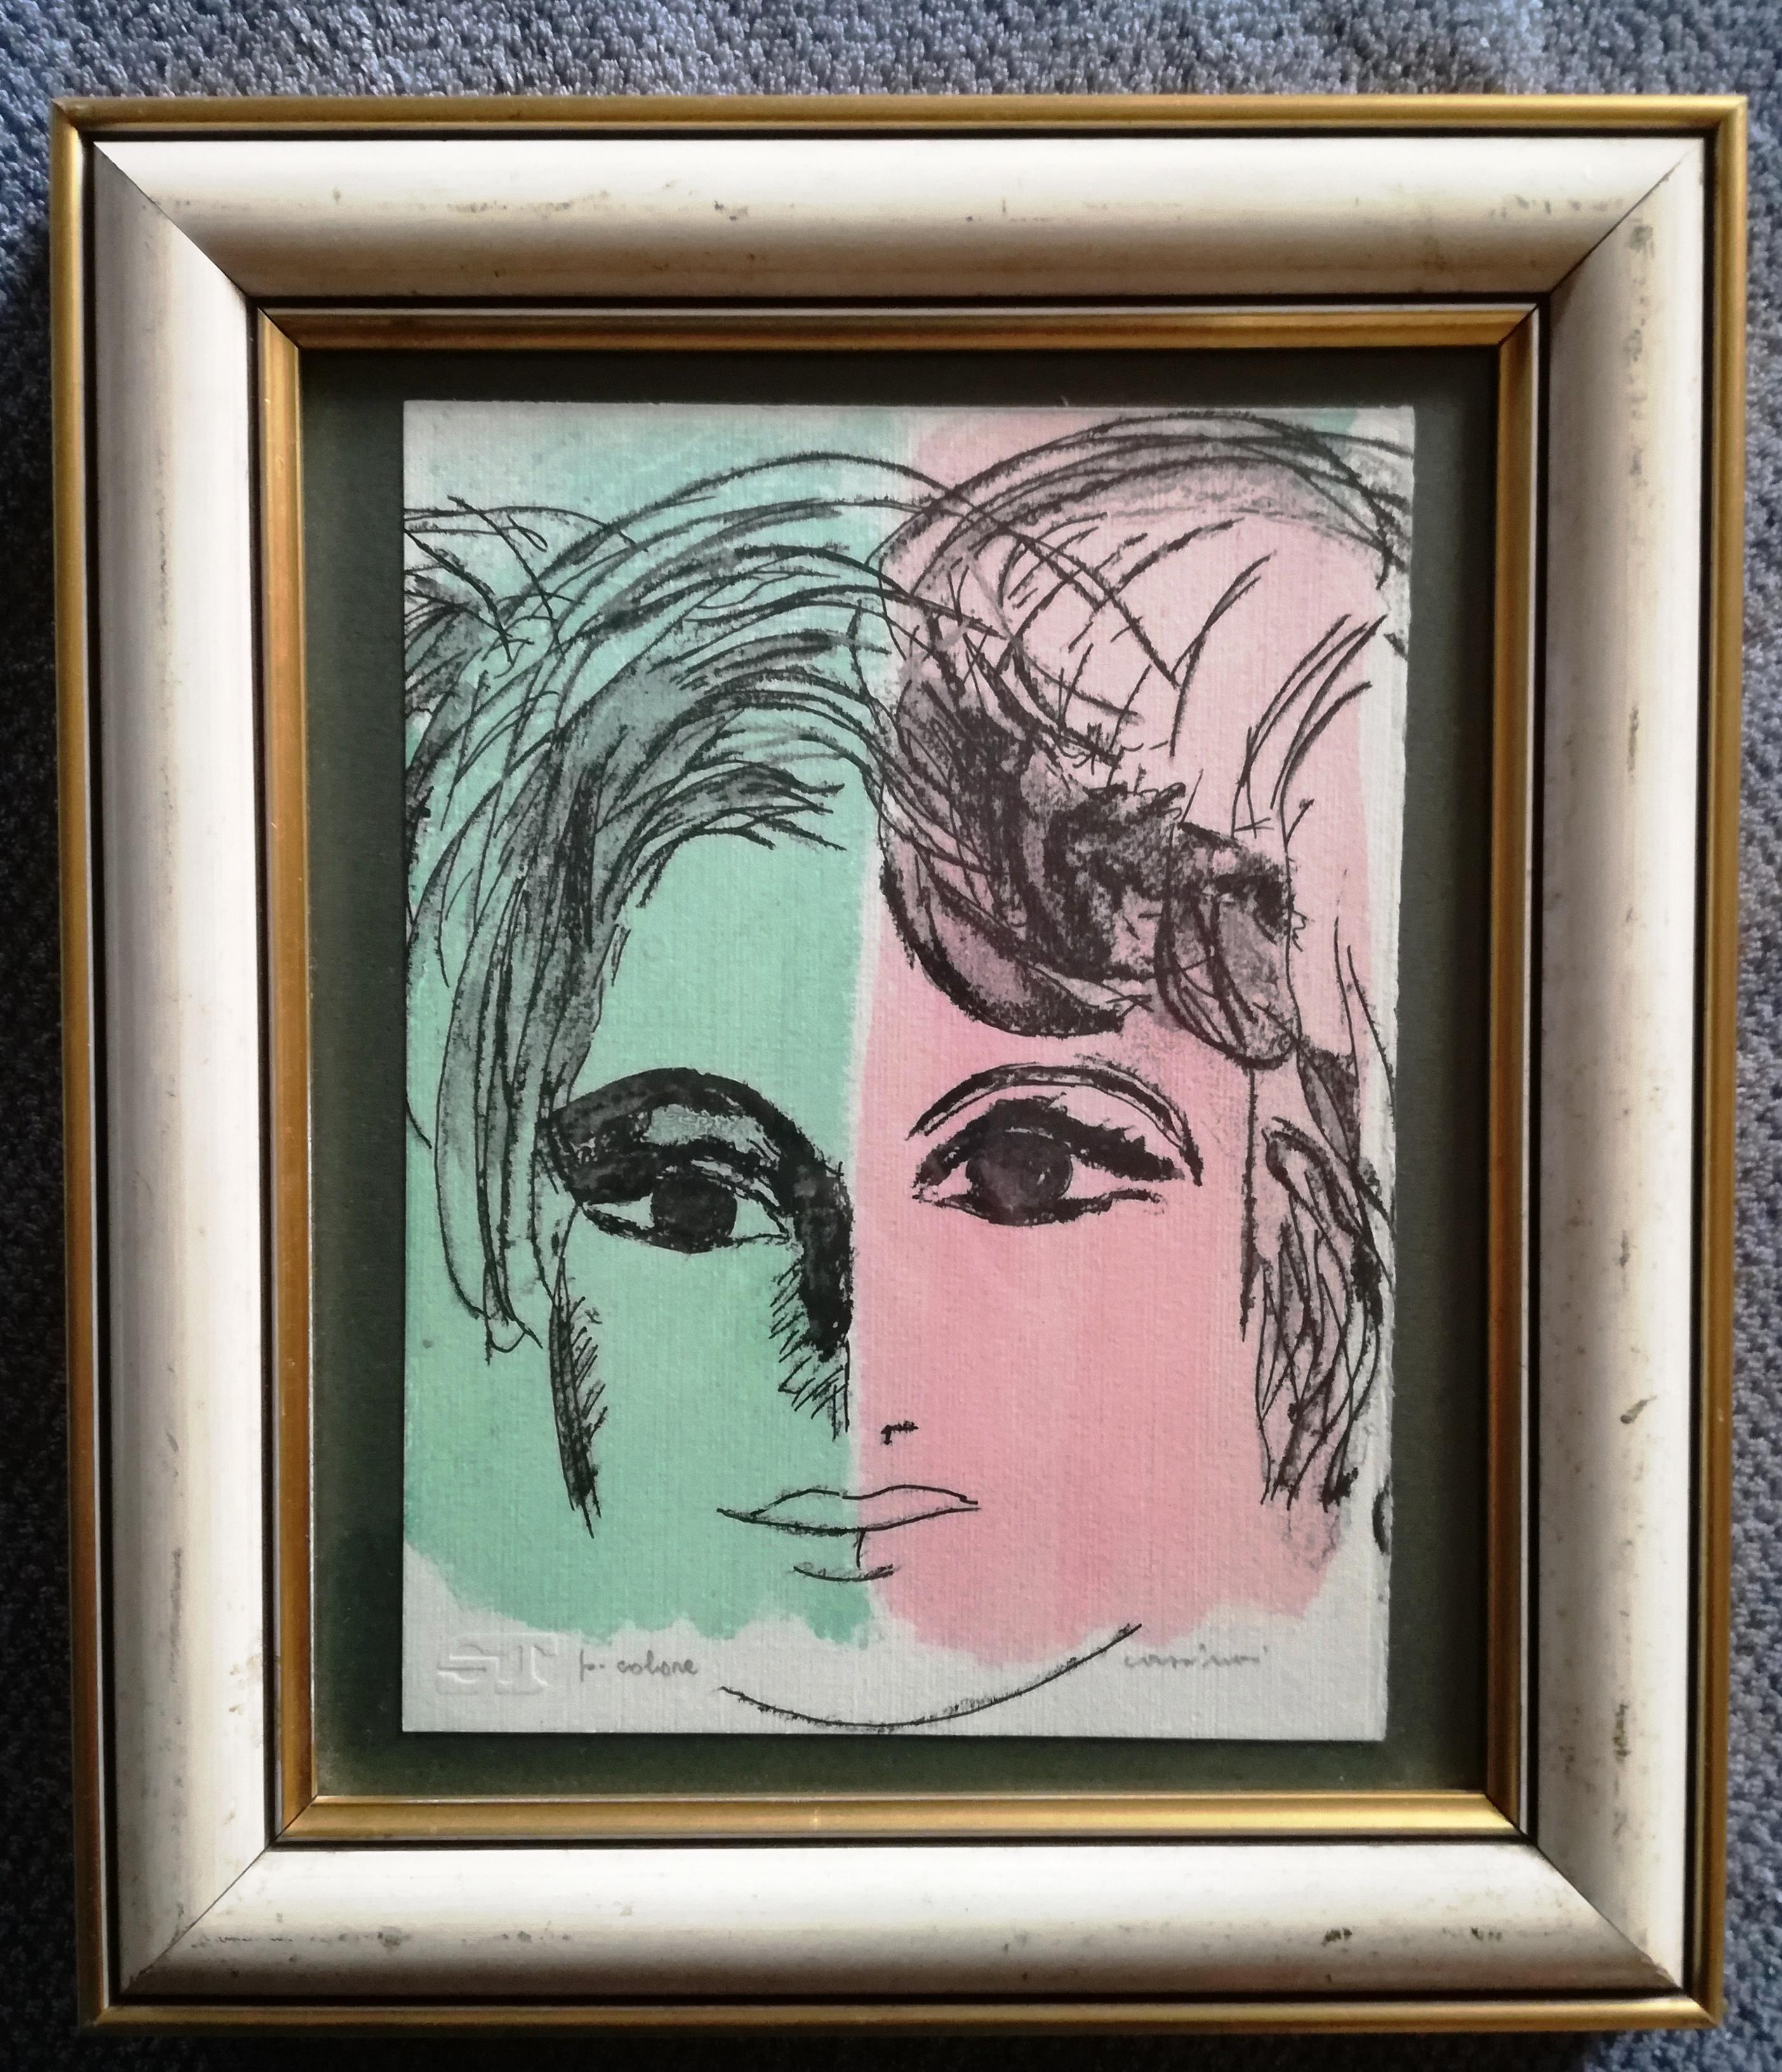 bruno cassinari, color lithograph , color proof. on logo paper ST pencil signature lower right. sold framed.. frame size 34 x 29 lithograph size 18 x 27